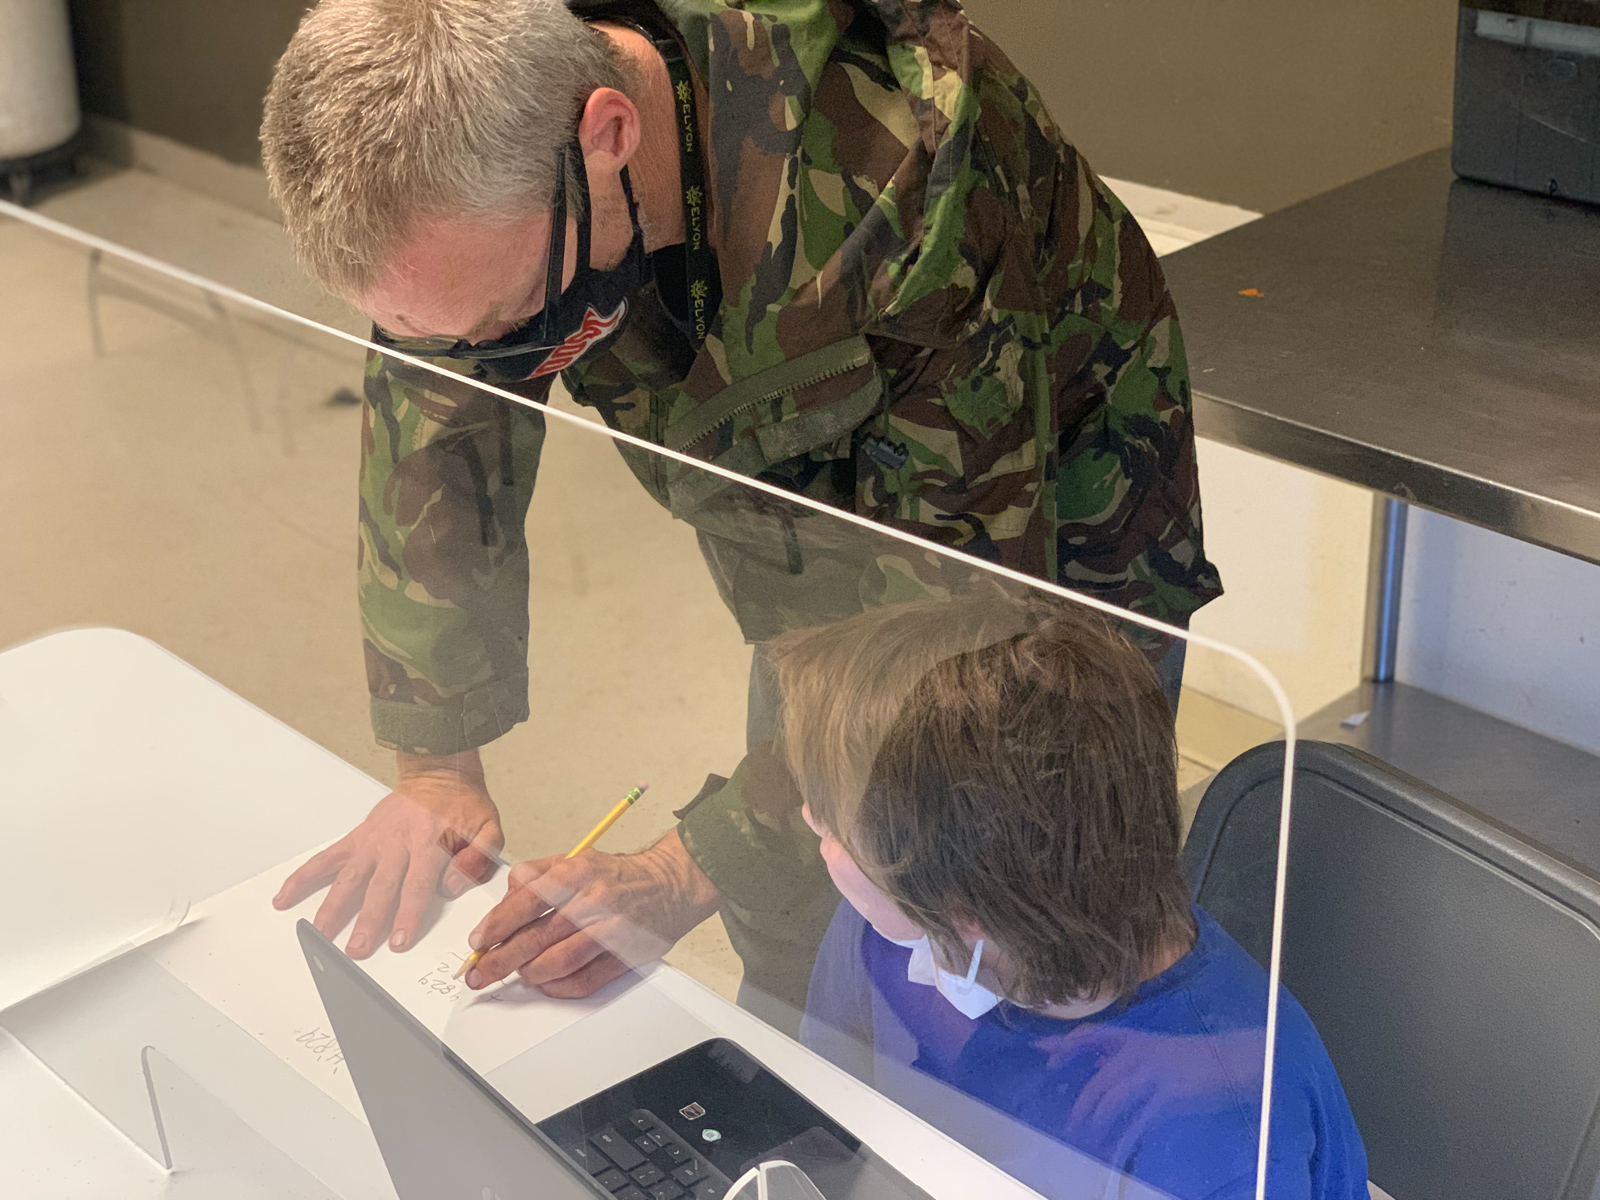 A man dressed in Army camouflage helping a young boy with his school work.